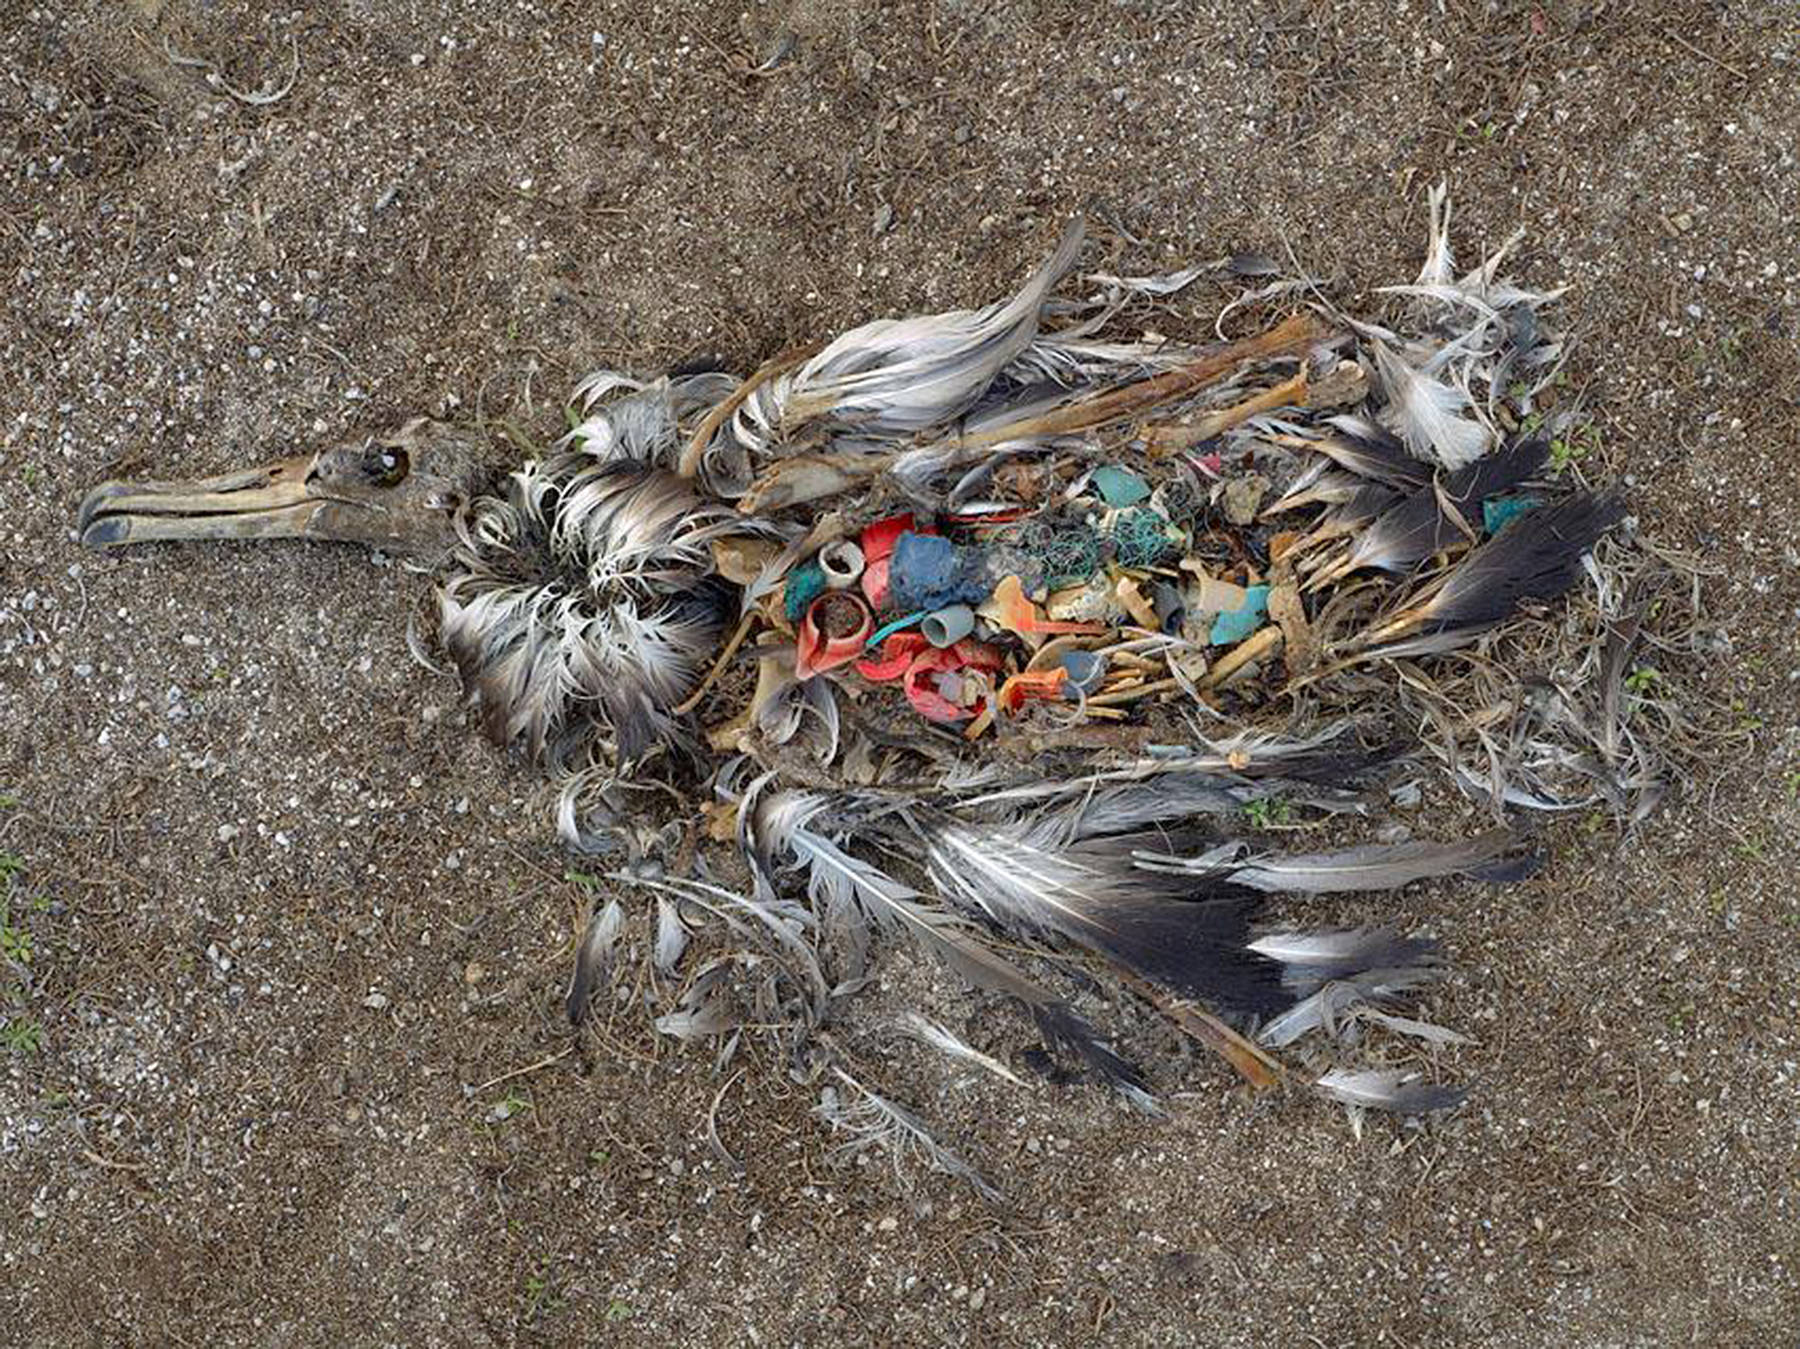 Young albatross die by the thousands at Midway Island in the Pacific after being fed plastic by their parents that’s mistaken for food. Photographer and artist Chris Jordan spent eight years documenting the beauty and destruction of one of the world’s most mythical birds. (Photo provided by Chris Jordan)